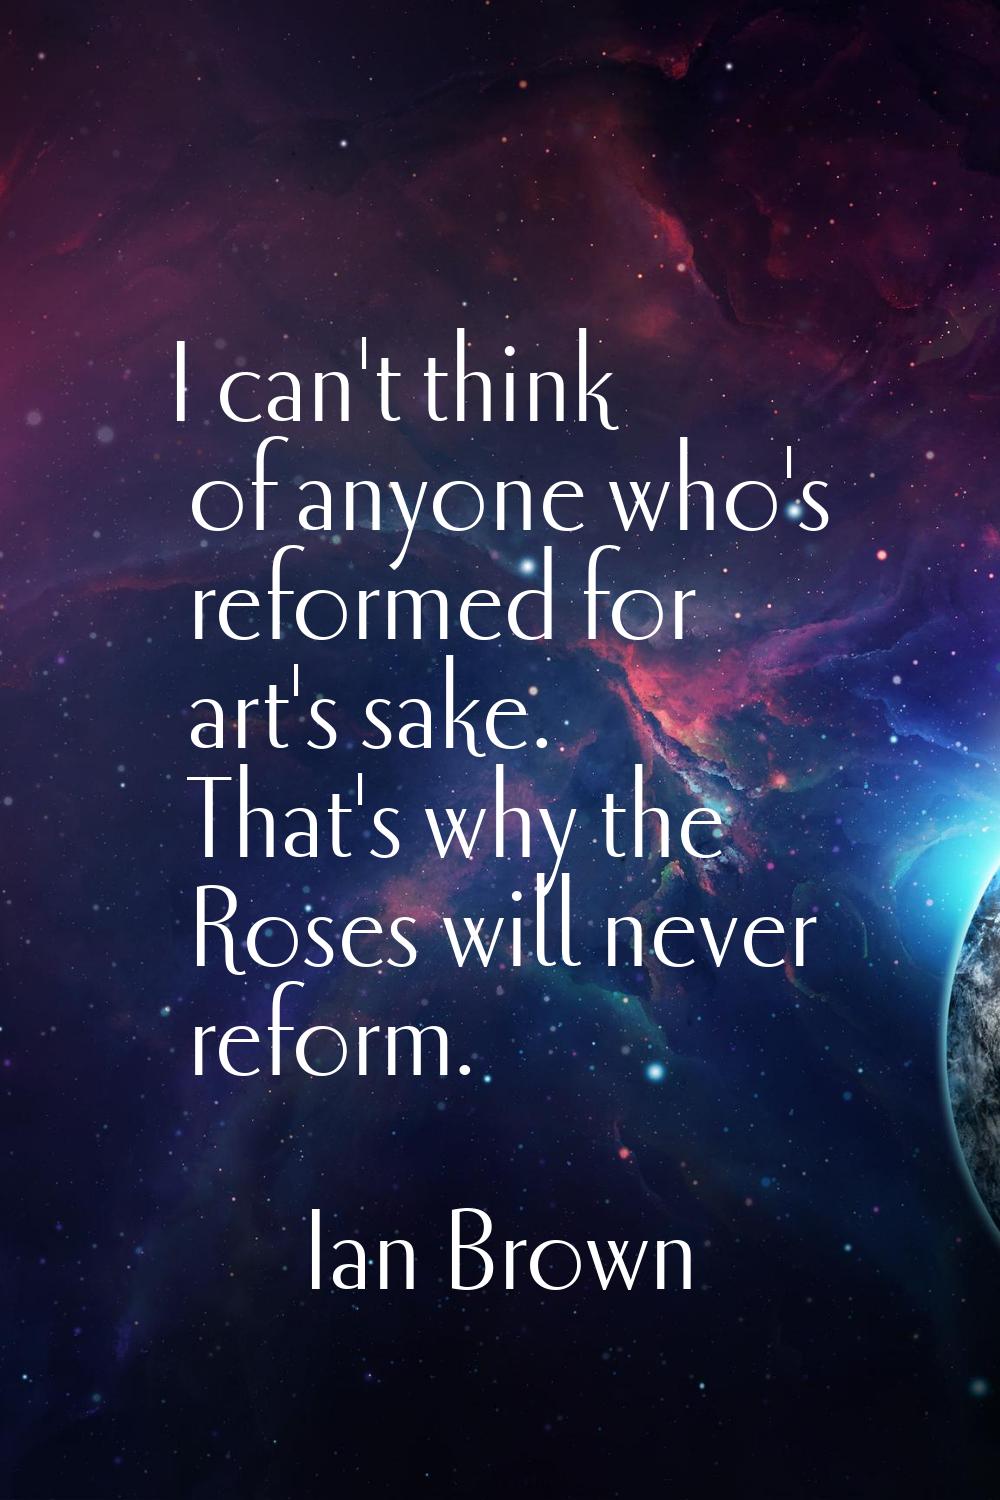 I can't think of anyone who's reformed for art's sake. That's why the Roses will never reform.